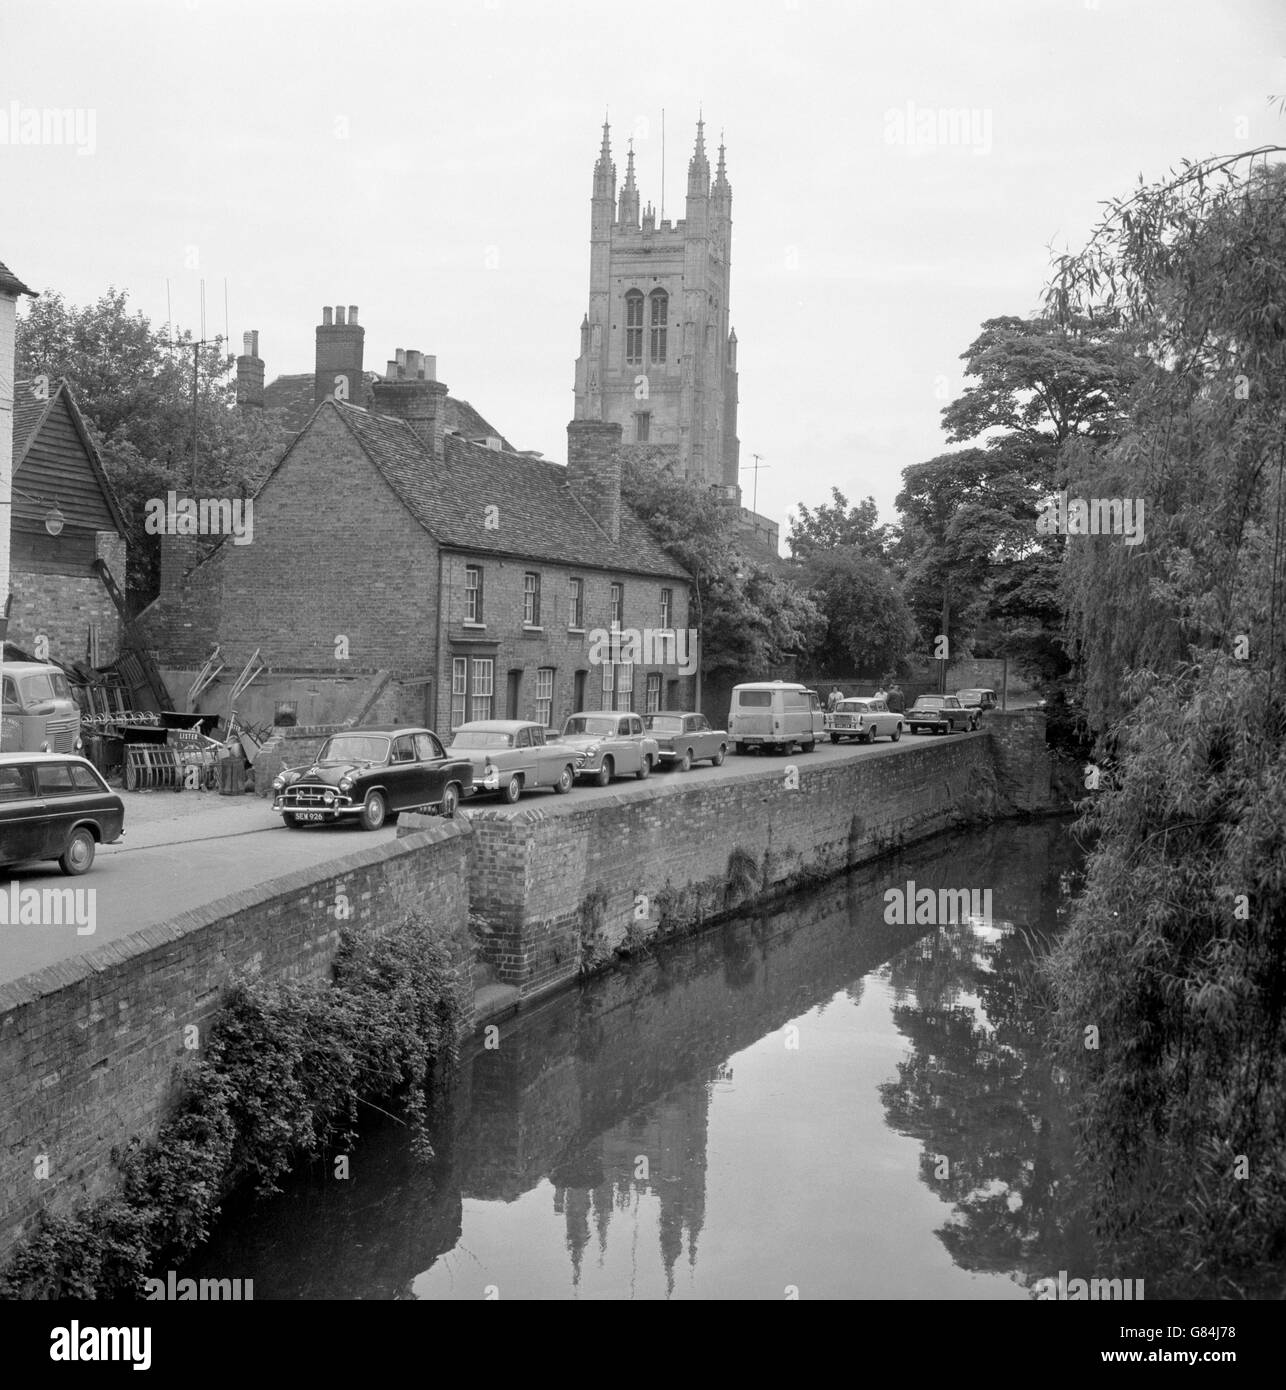 The River Ouse flows past the old houses at 15th-century parish church of St Neots, known locally as the Cathedral of Huntingdonshire. Stock Photo